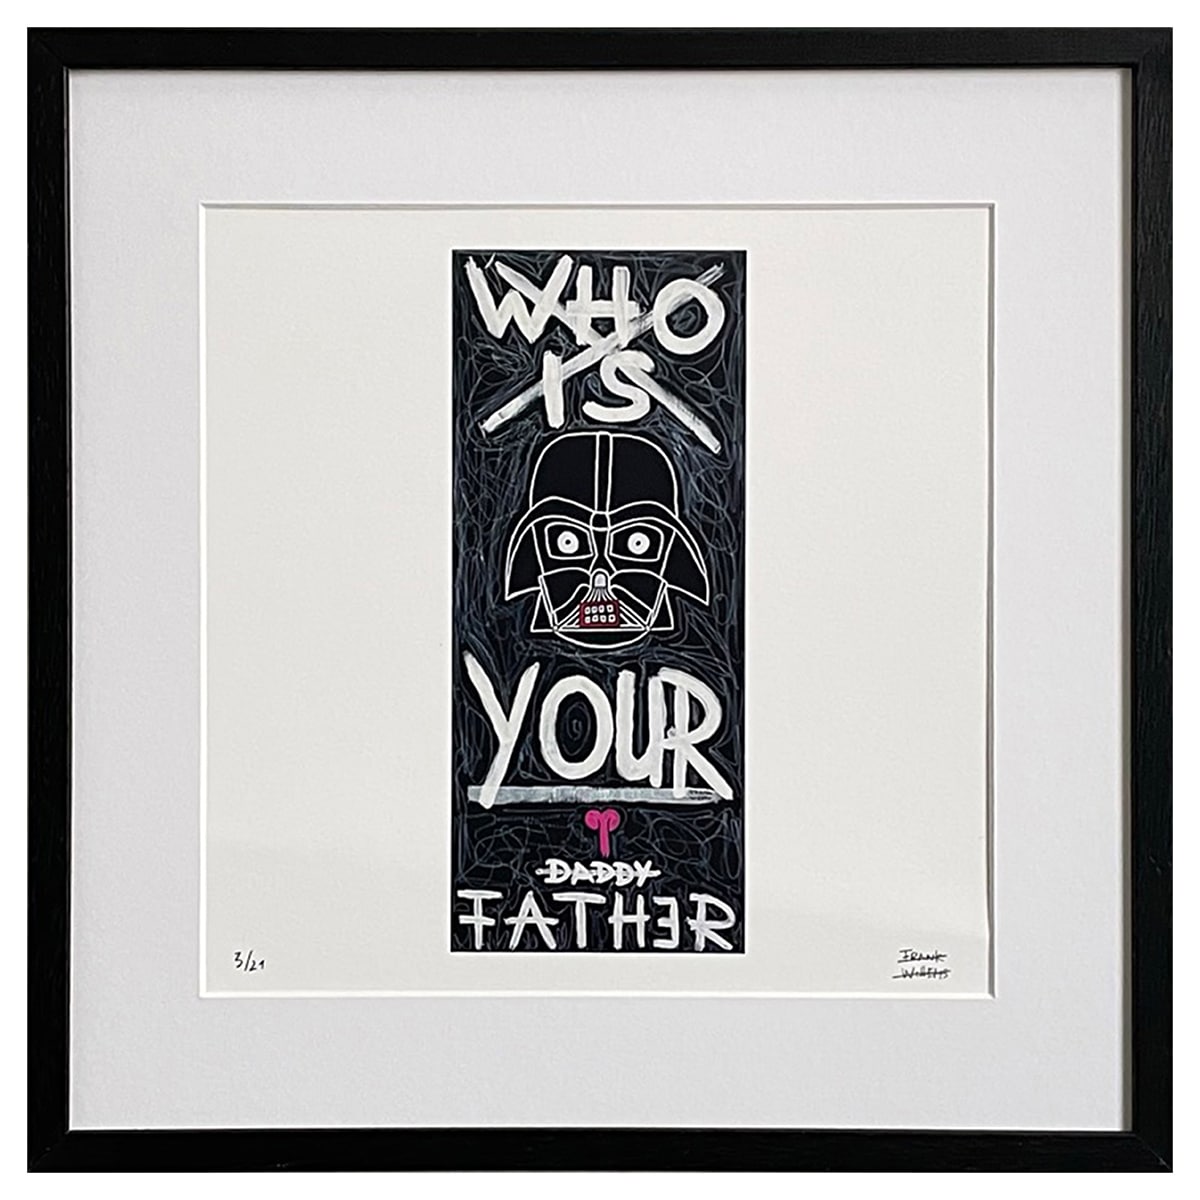 Limited Edt Art Prints - WHO IS YOUR FATHER - Frank Willems